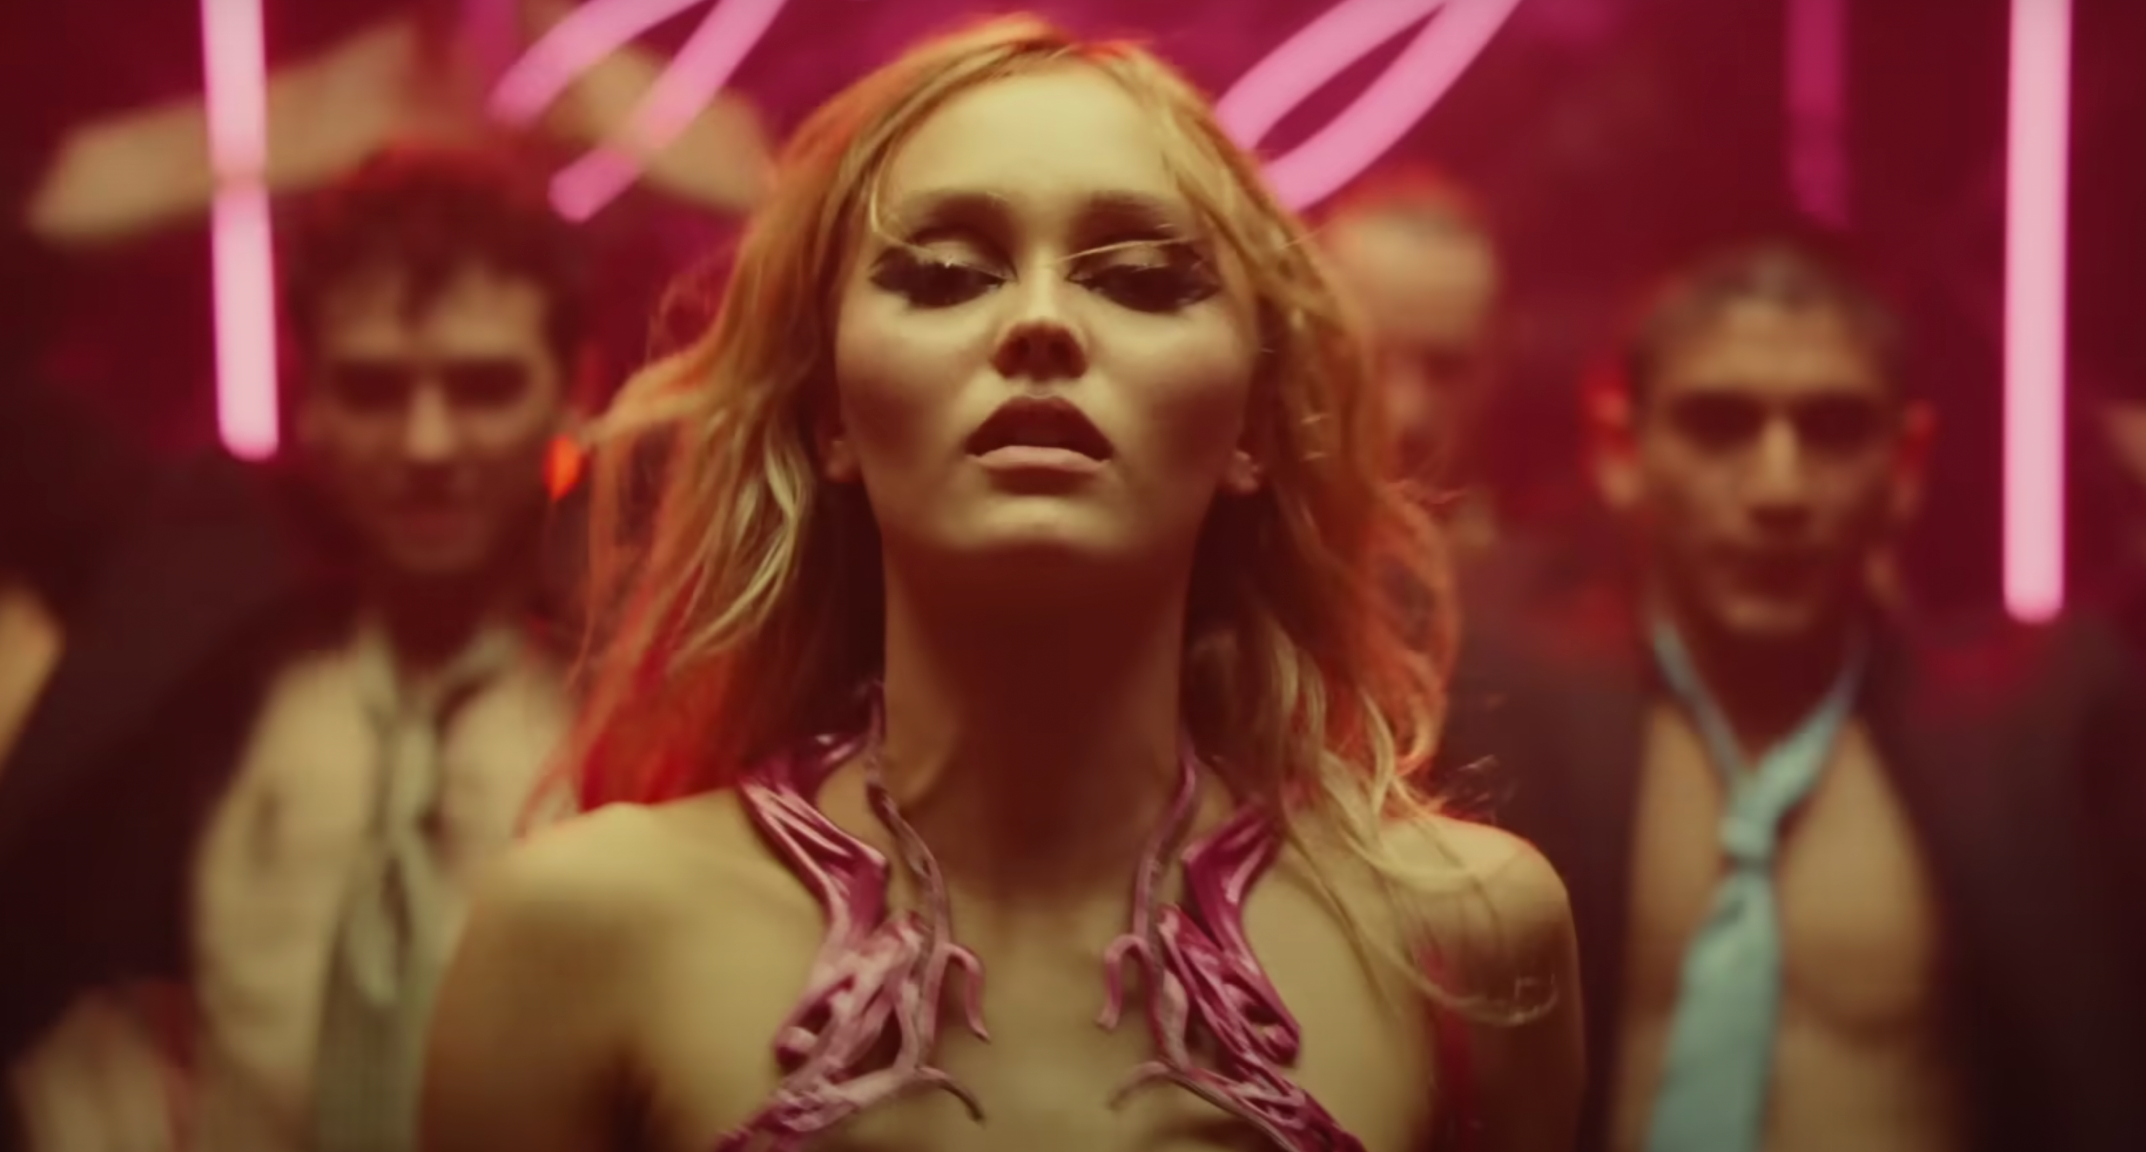 The Weeknd, Lily-Rose Depp and HBO Defend The Idol amid Controversy